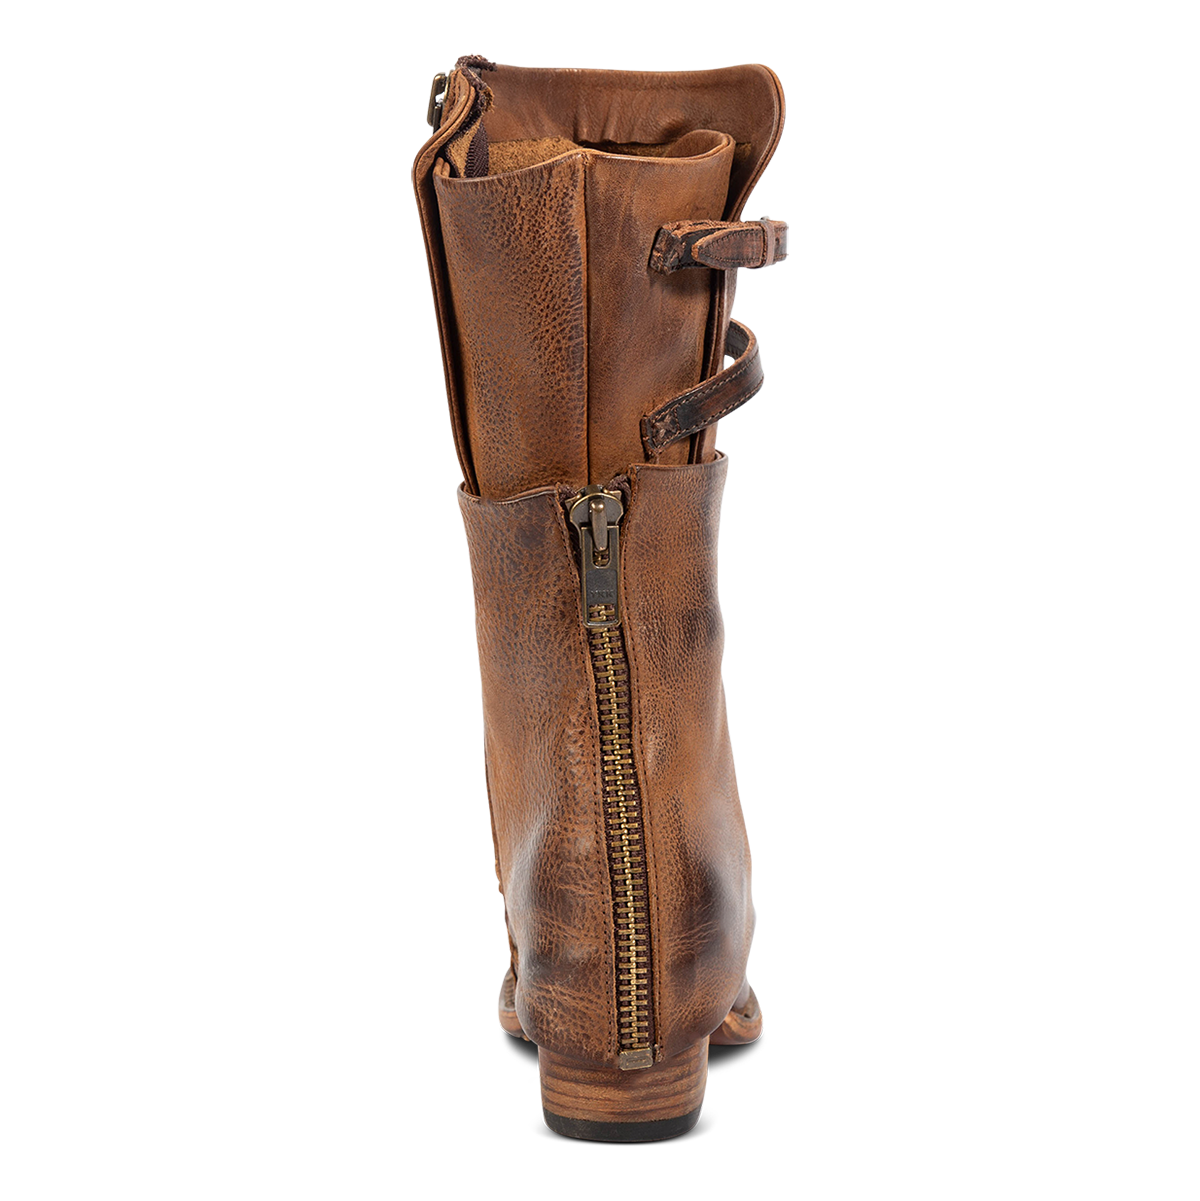 Back view showing a decorative brass shaft zipper, stacked heel and asymmetrical shaft height on FREEBIRD women's Caboose tan leather boot